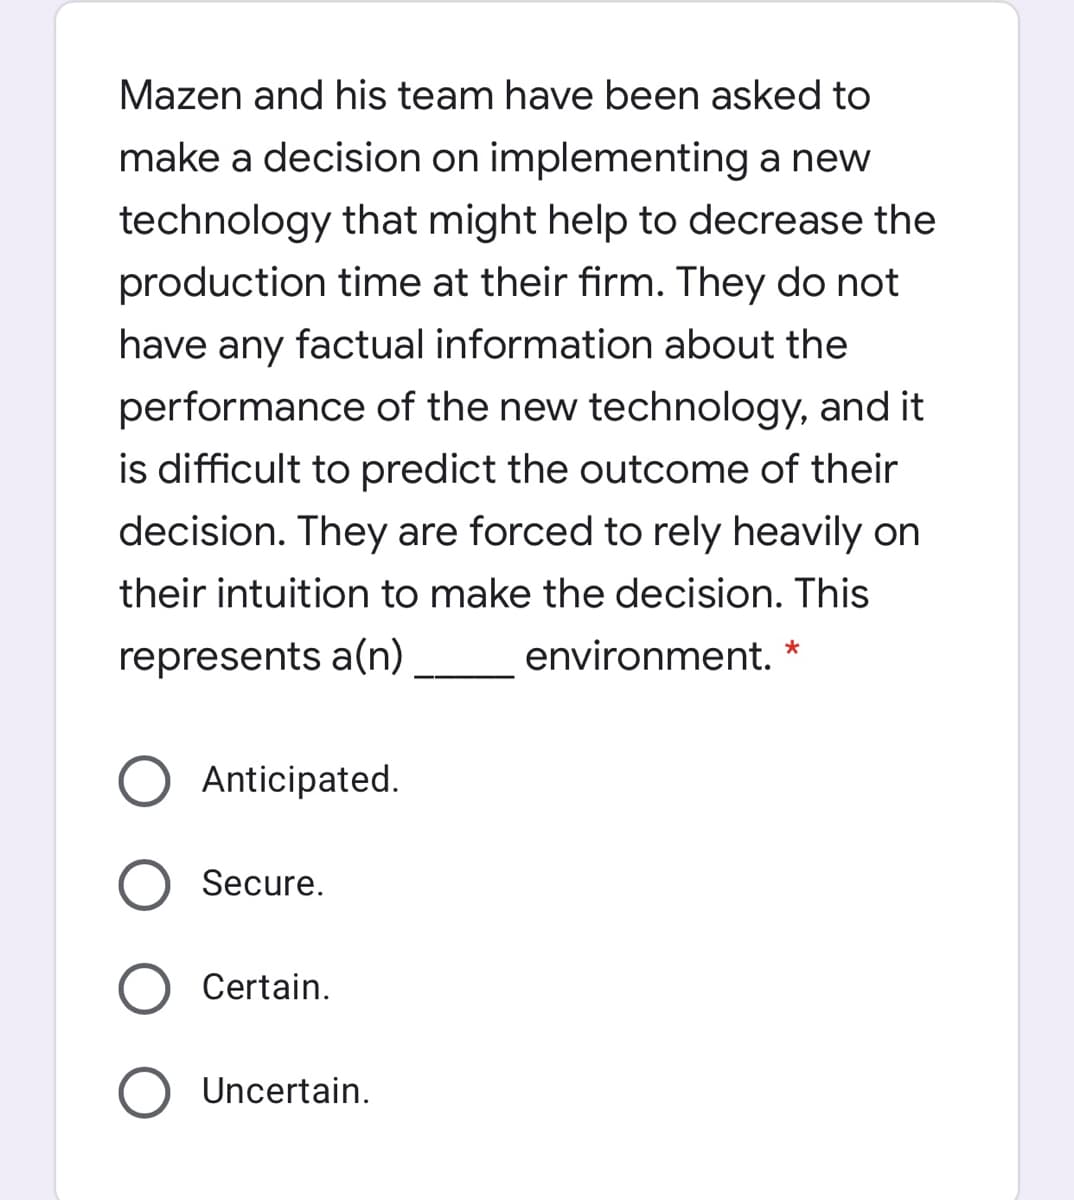 Mazen and his team have been asked to
make a decision on implementing a new
technology that might help to decrease the
production time at their firm. They do not
have any factual information about the
performance of the new technology, and it
is difficult to predict the outcome of their
decision. They are forced to rely heavily on
their intuition to make the decision. This
represents a(n)
environment. *
Anticipated.
Secure.
Certain.
Uncertain.
